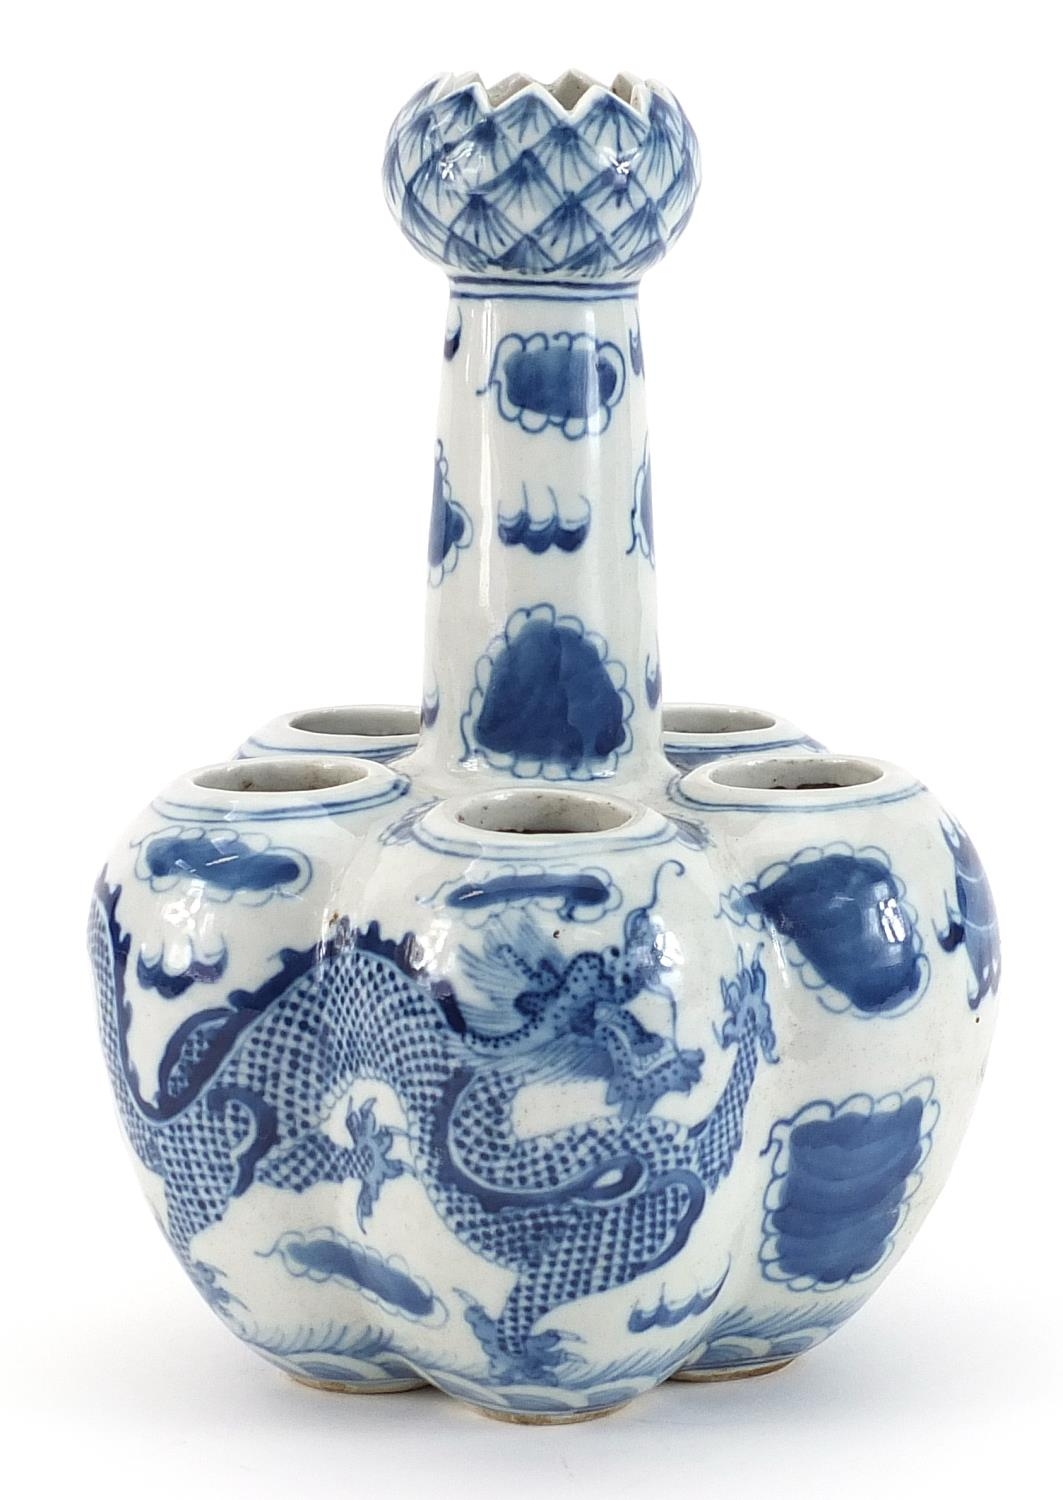 Chinese blue and white porcelain tulip vase hand painted with dragons chasing a flaming pearl